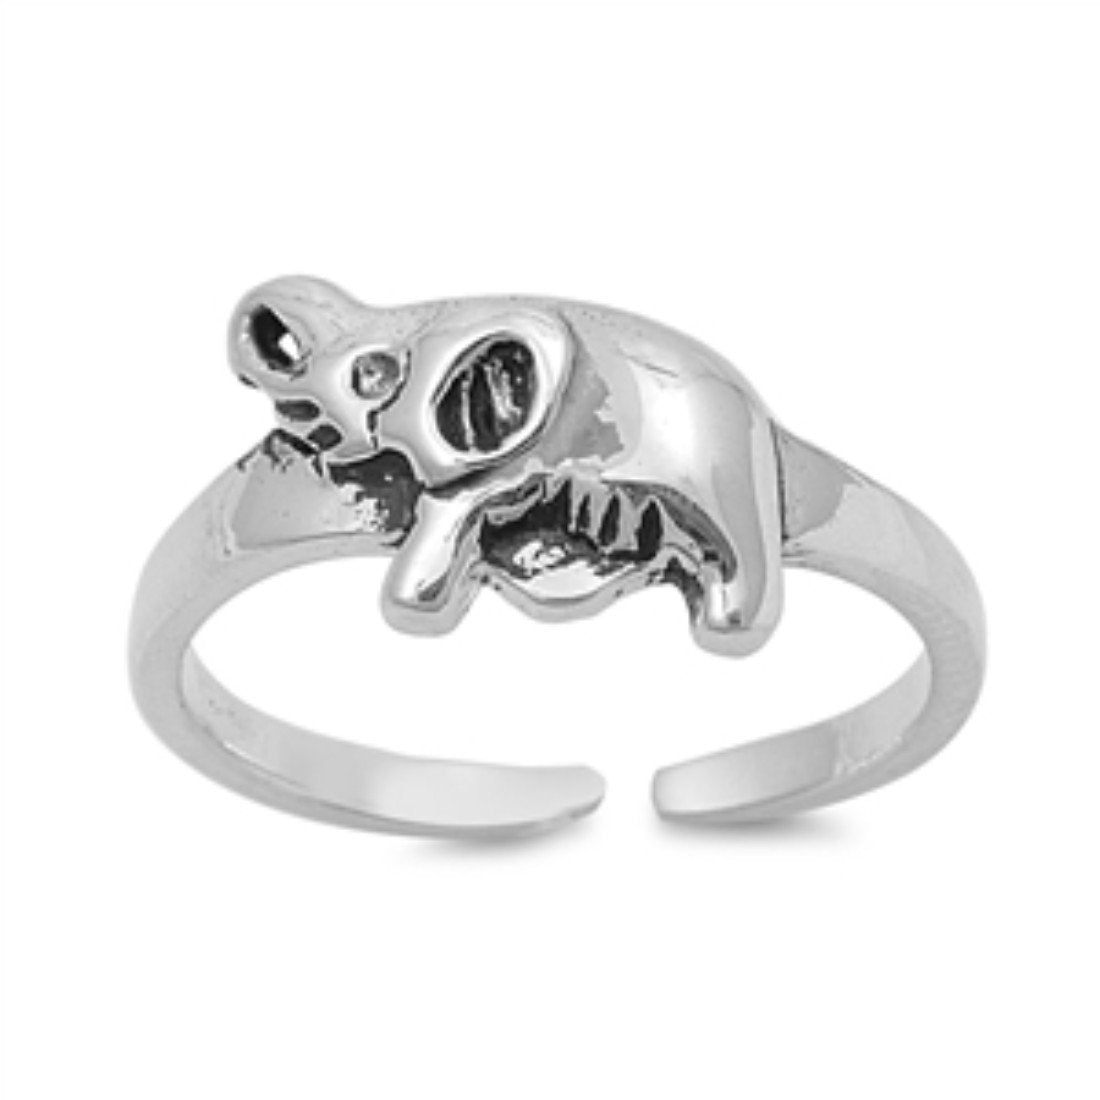 Elephant Toe Ring Adjustable Band 925 Sterling Silver (12mm)